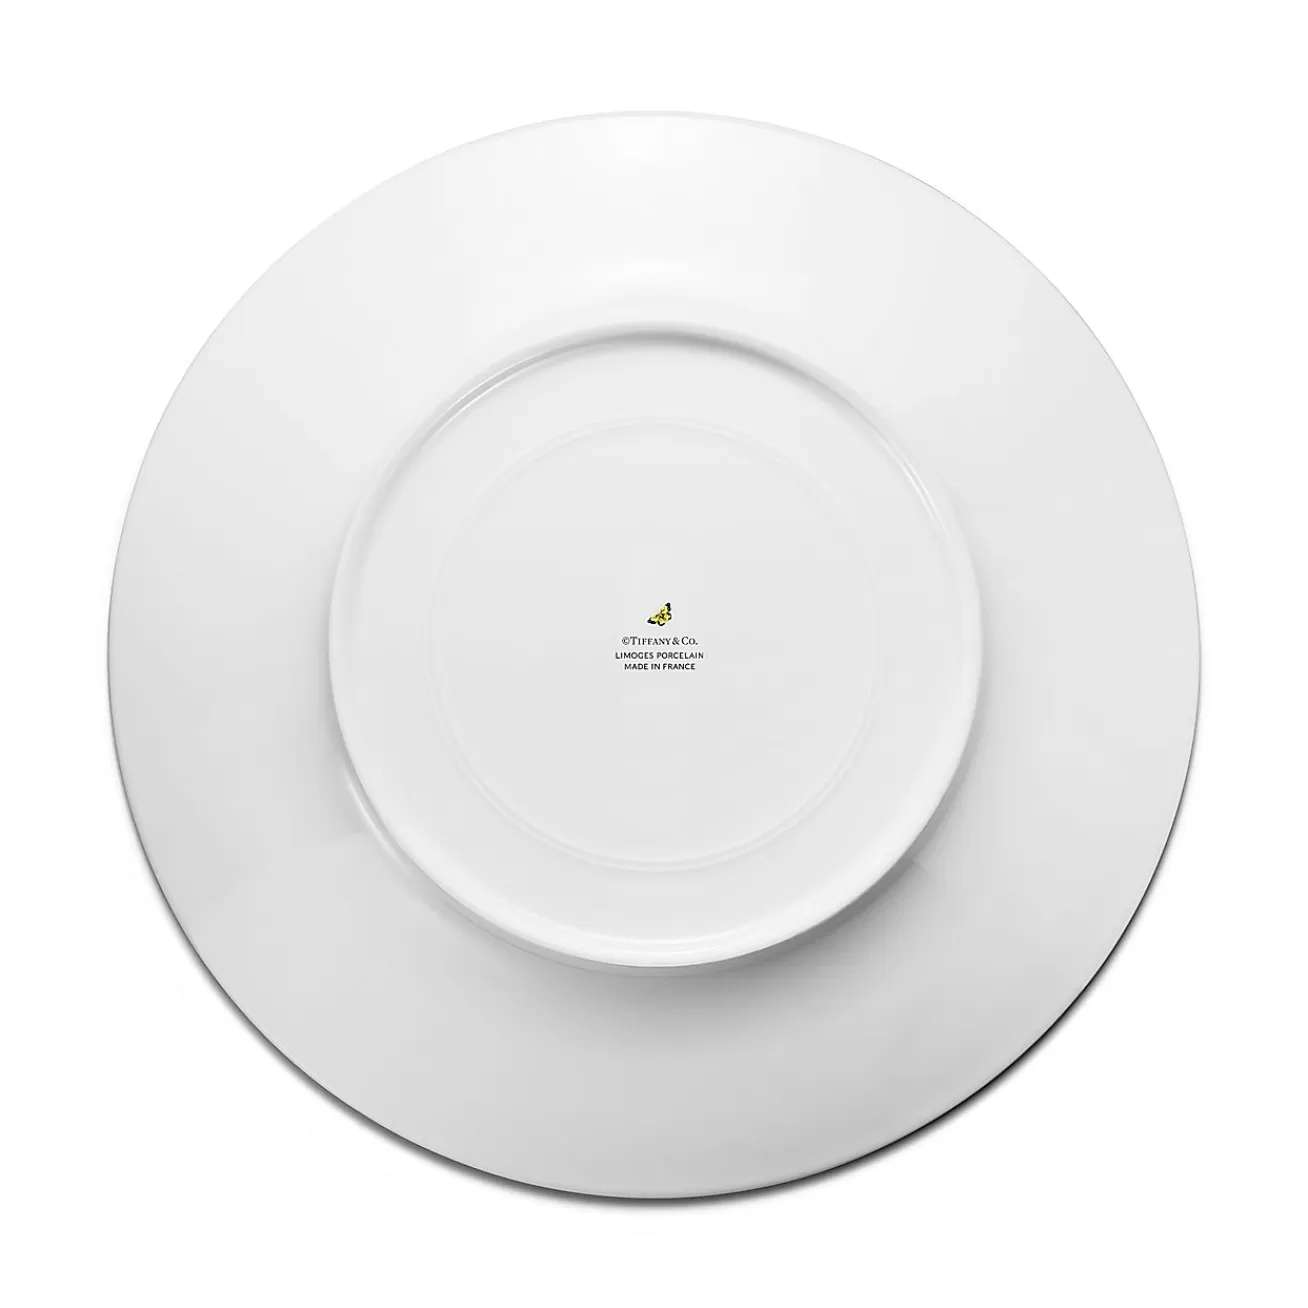 Tiffany & Co. Tiffany Jardin Charger Plate in Porcelain | ^ The Home | Housewarming Gifts